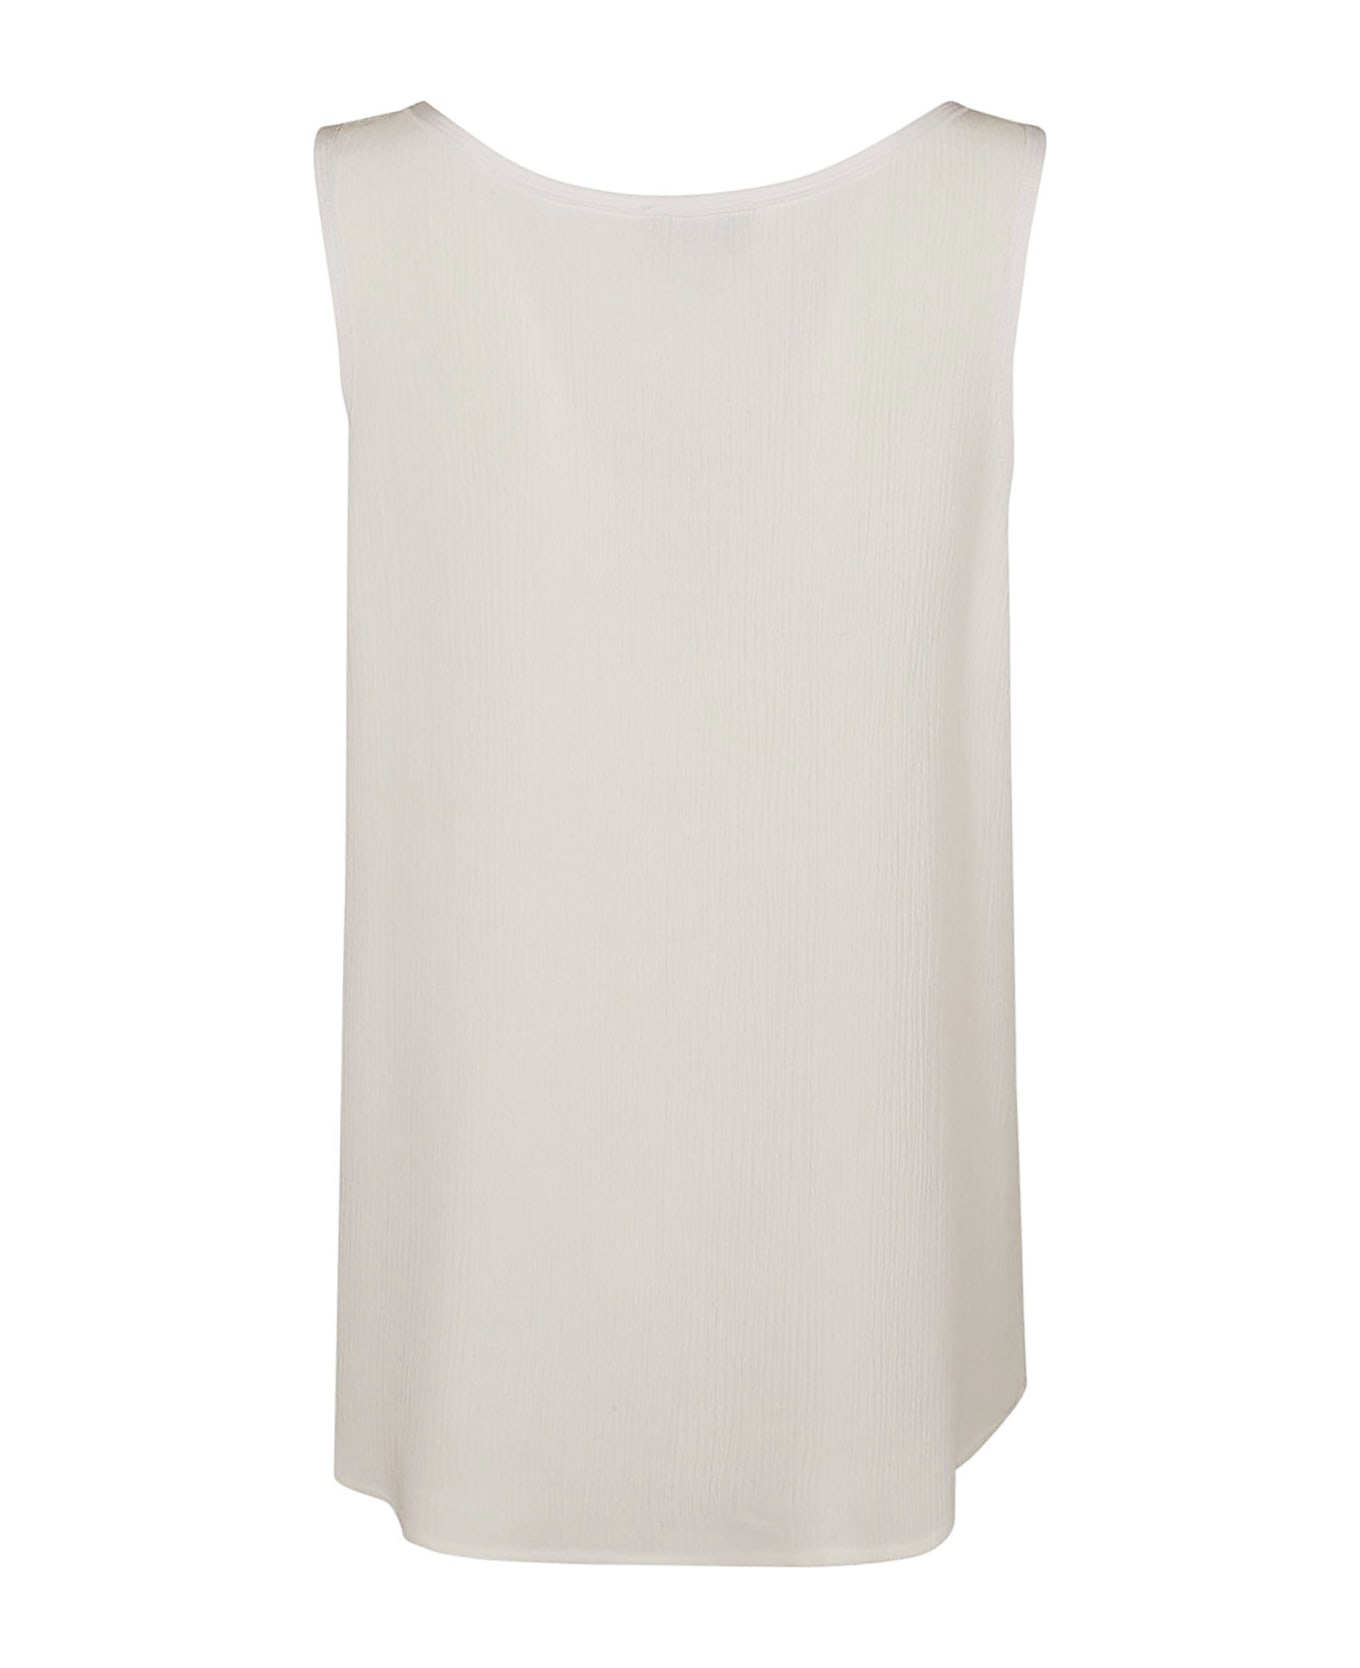 A.P.C. Lucy Top - blanc casse